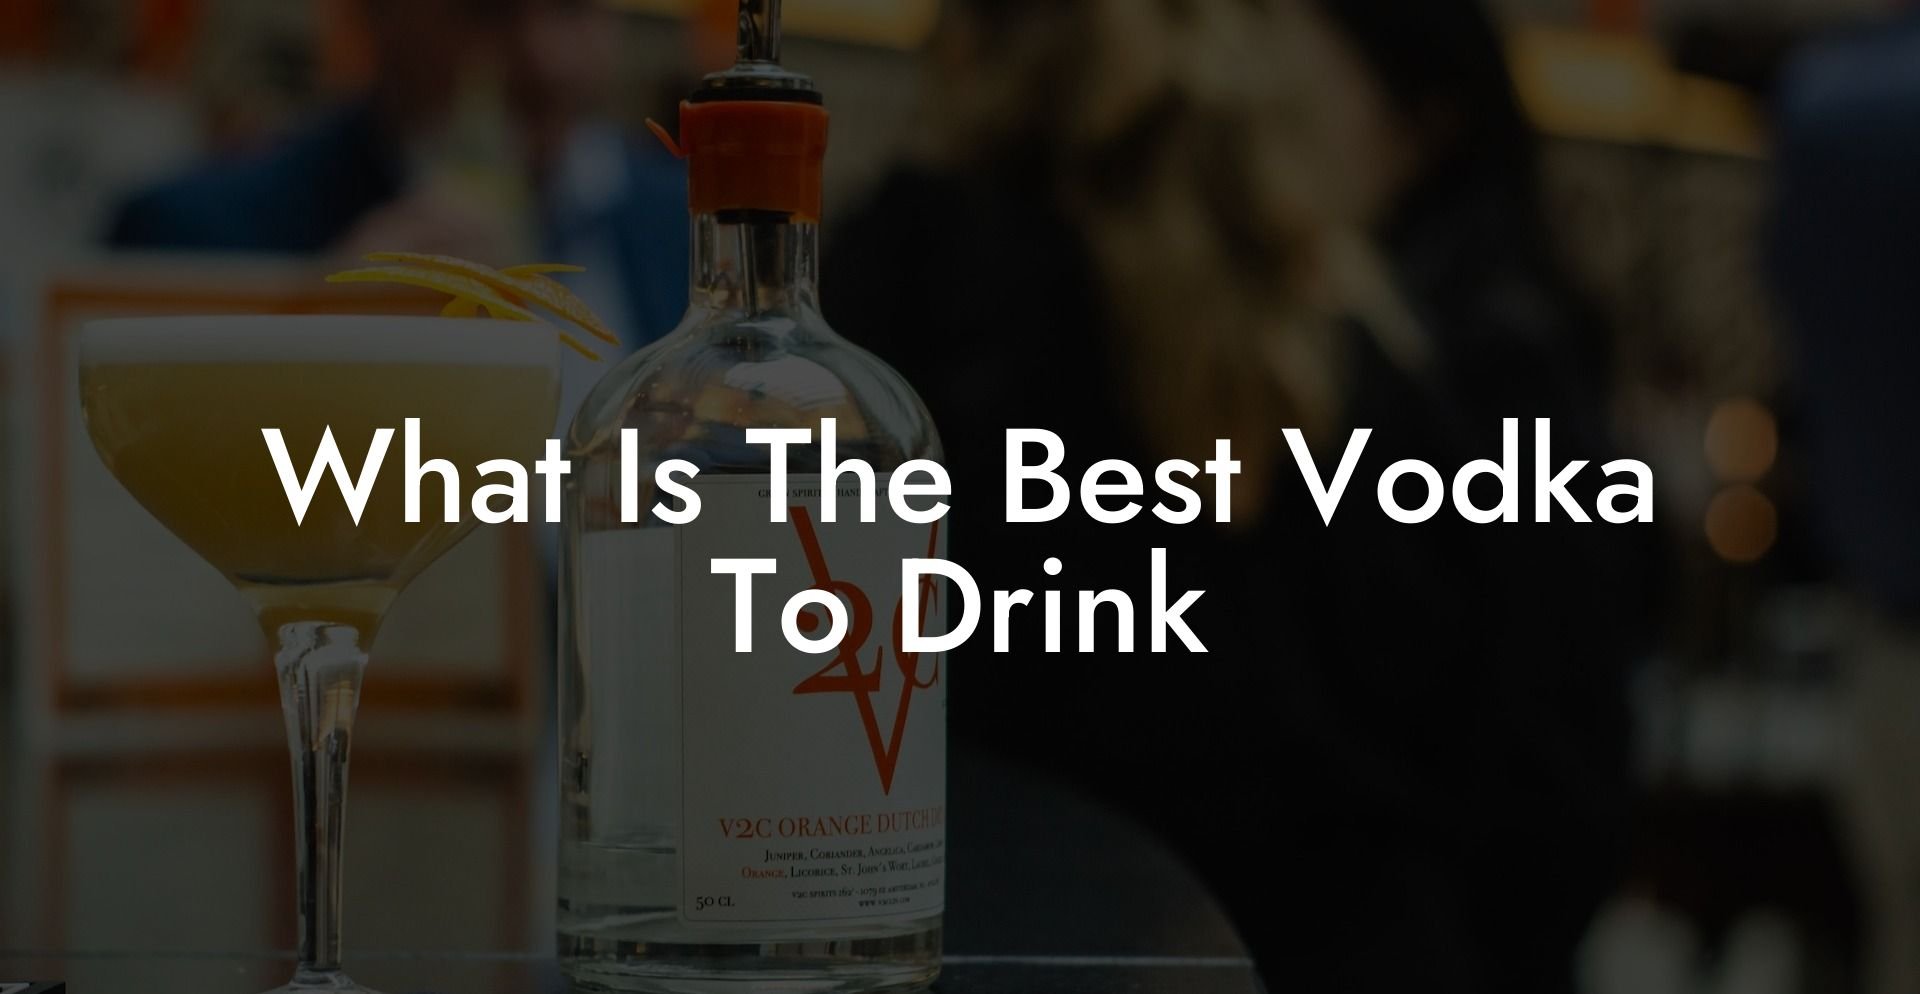 What Is The Best Vodka To Drink